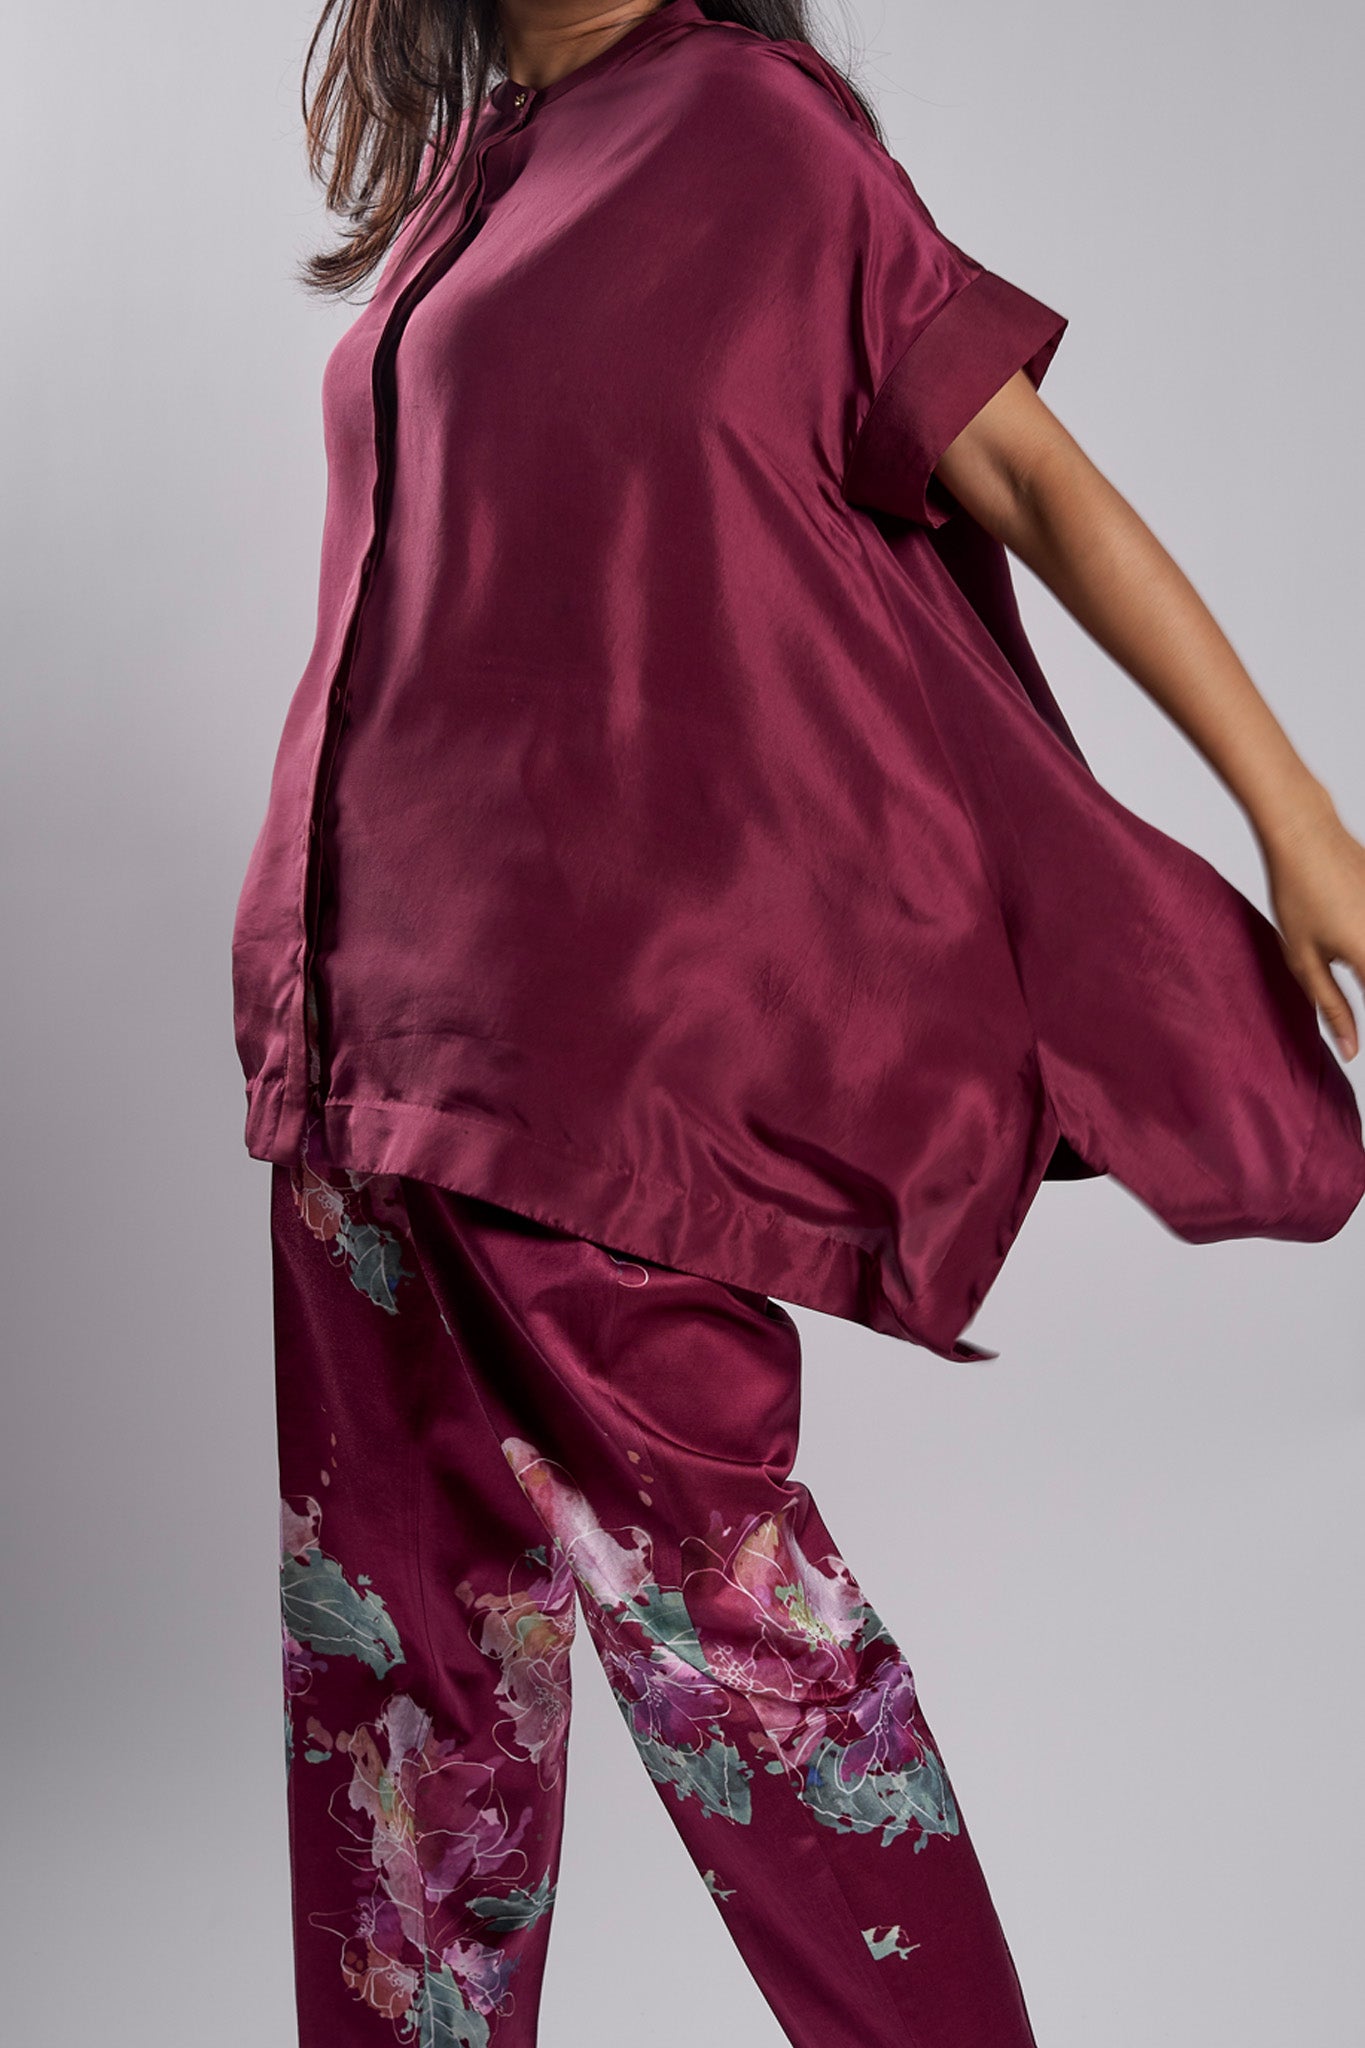 Marsala Solid top with Watercolour Peonies pants Coordinated set